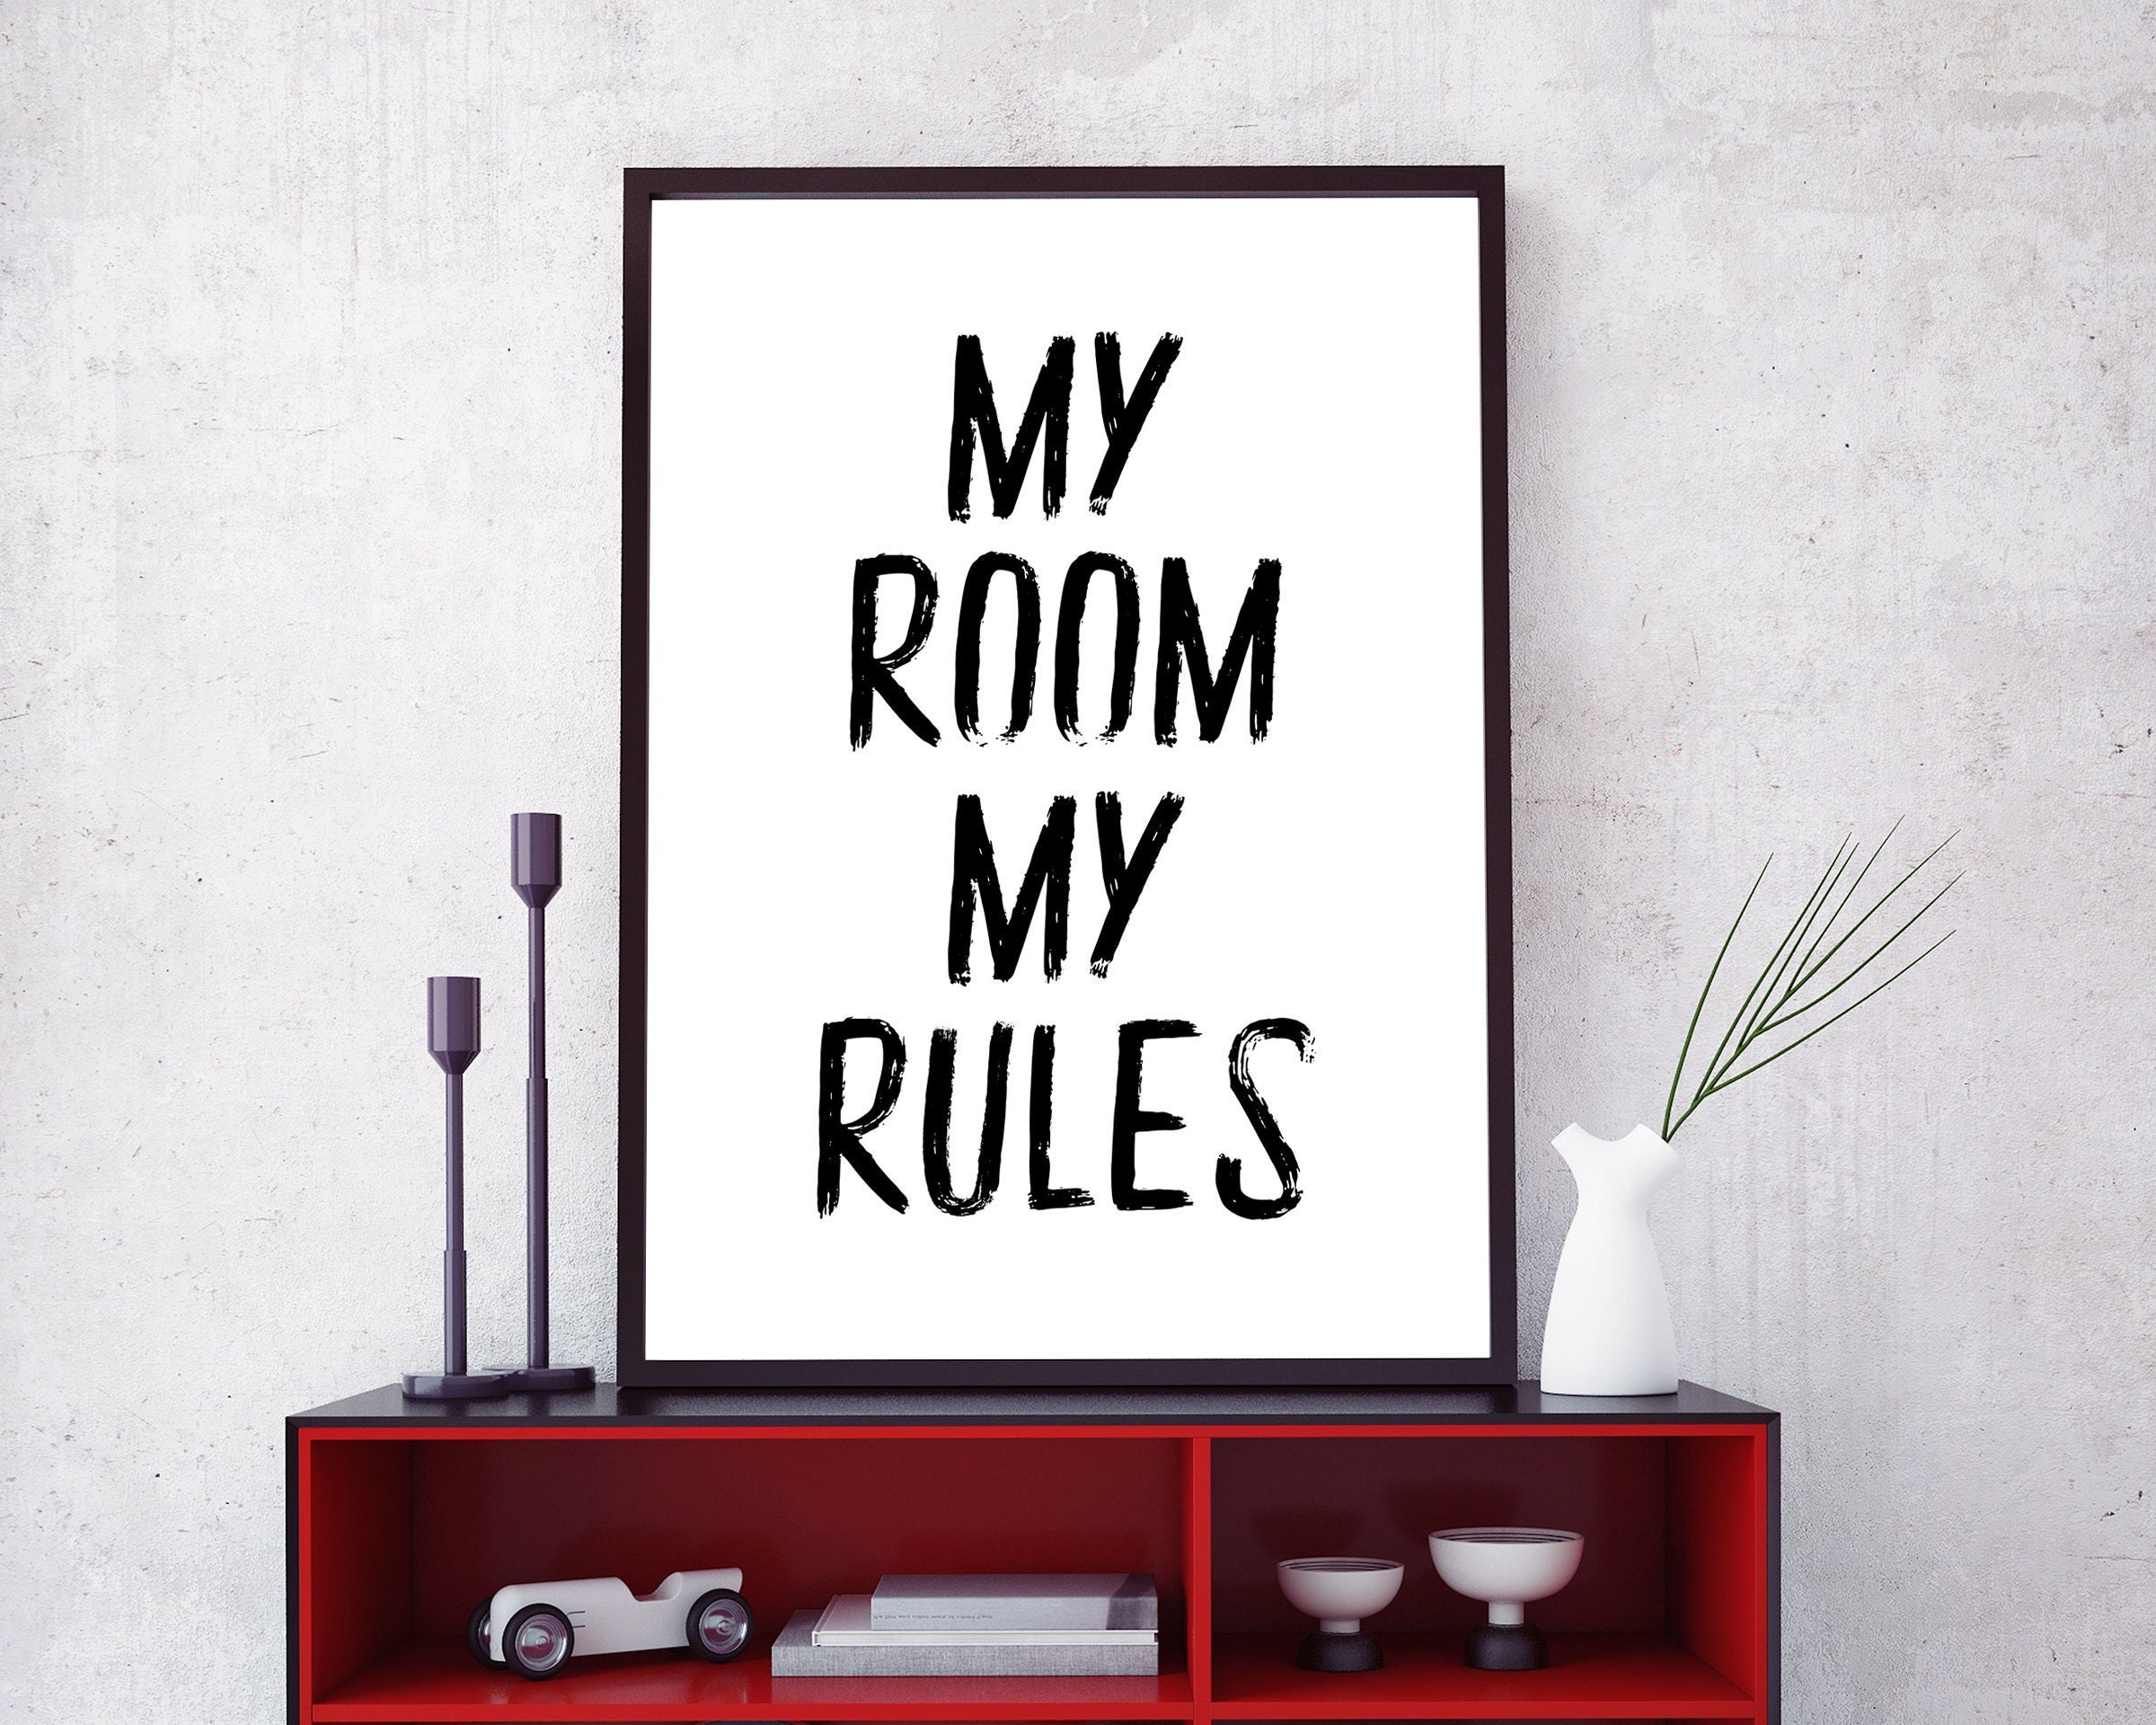 My Room Rules. My Room my Rules. My Bedroom Rules. Rules for my Room. Its a room